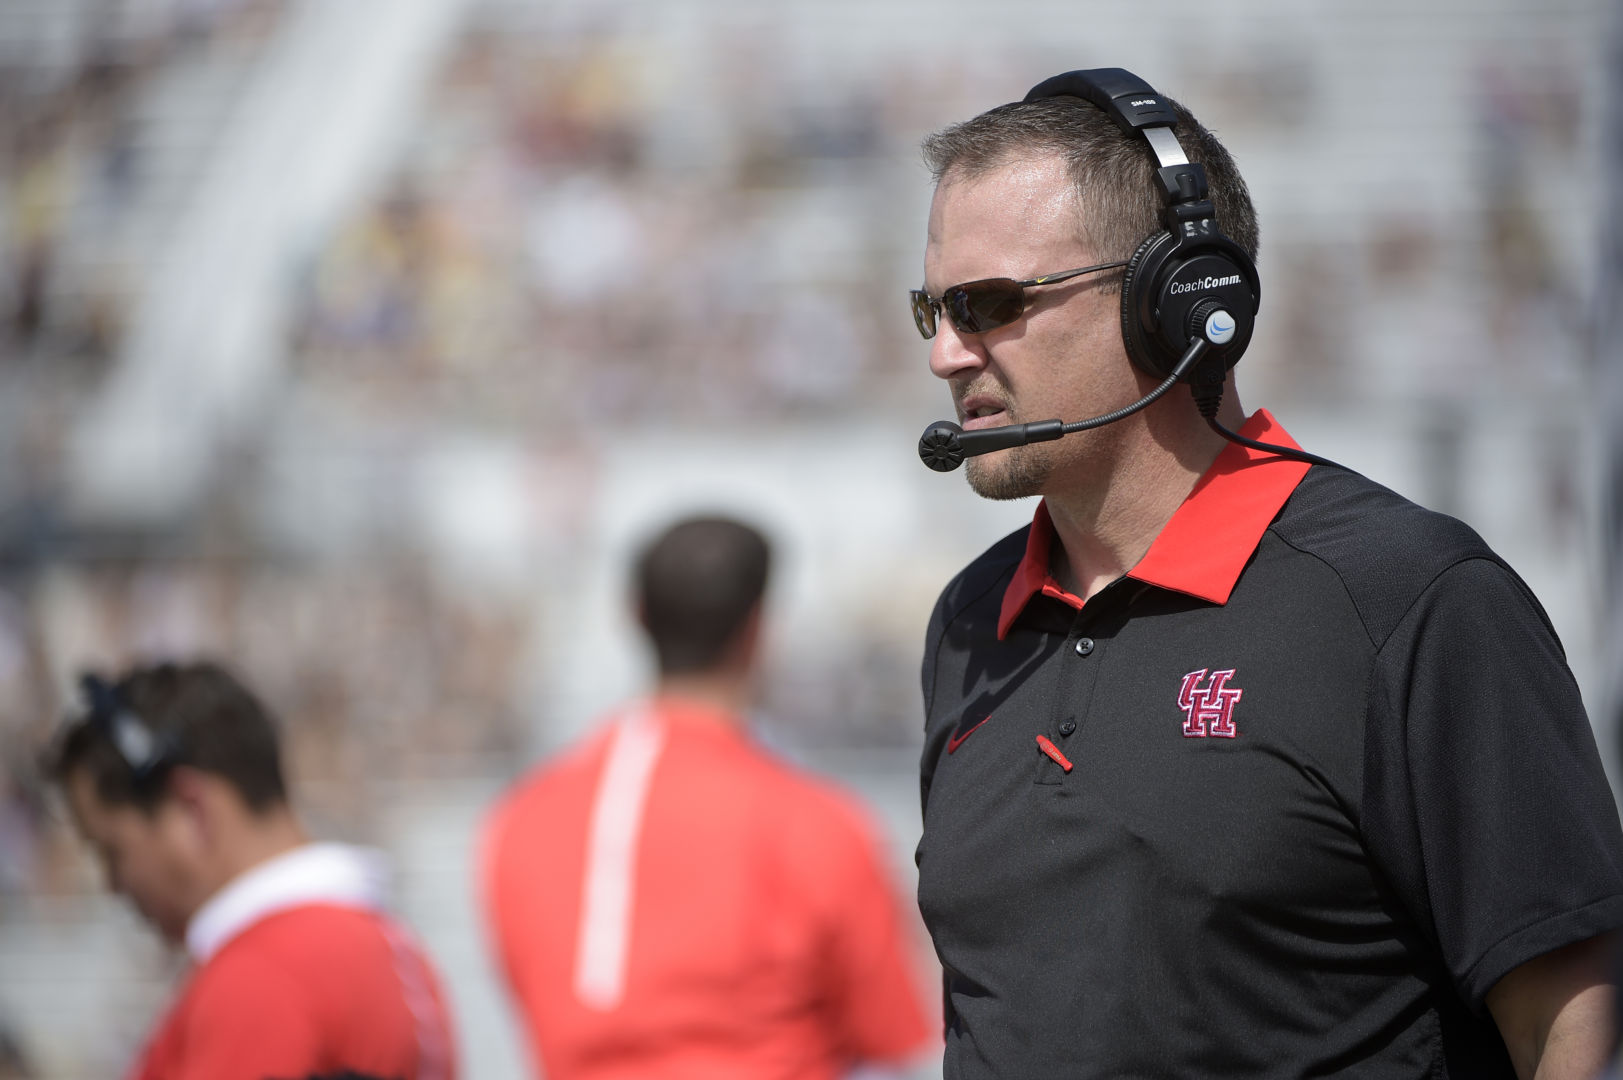 Houston head coach Tom Herman watches from the sideline during the first half of an NCAA college football game against Central Florida in Orlando, Fla., Saturday, Oct. 24, 2015. (Photo/Phelan M. Ebenhack)